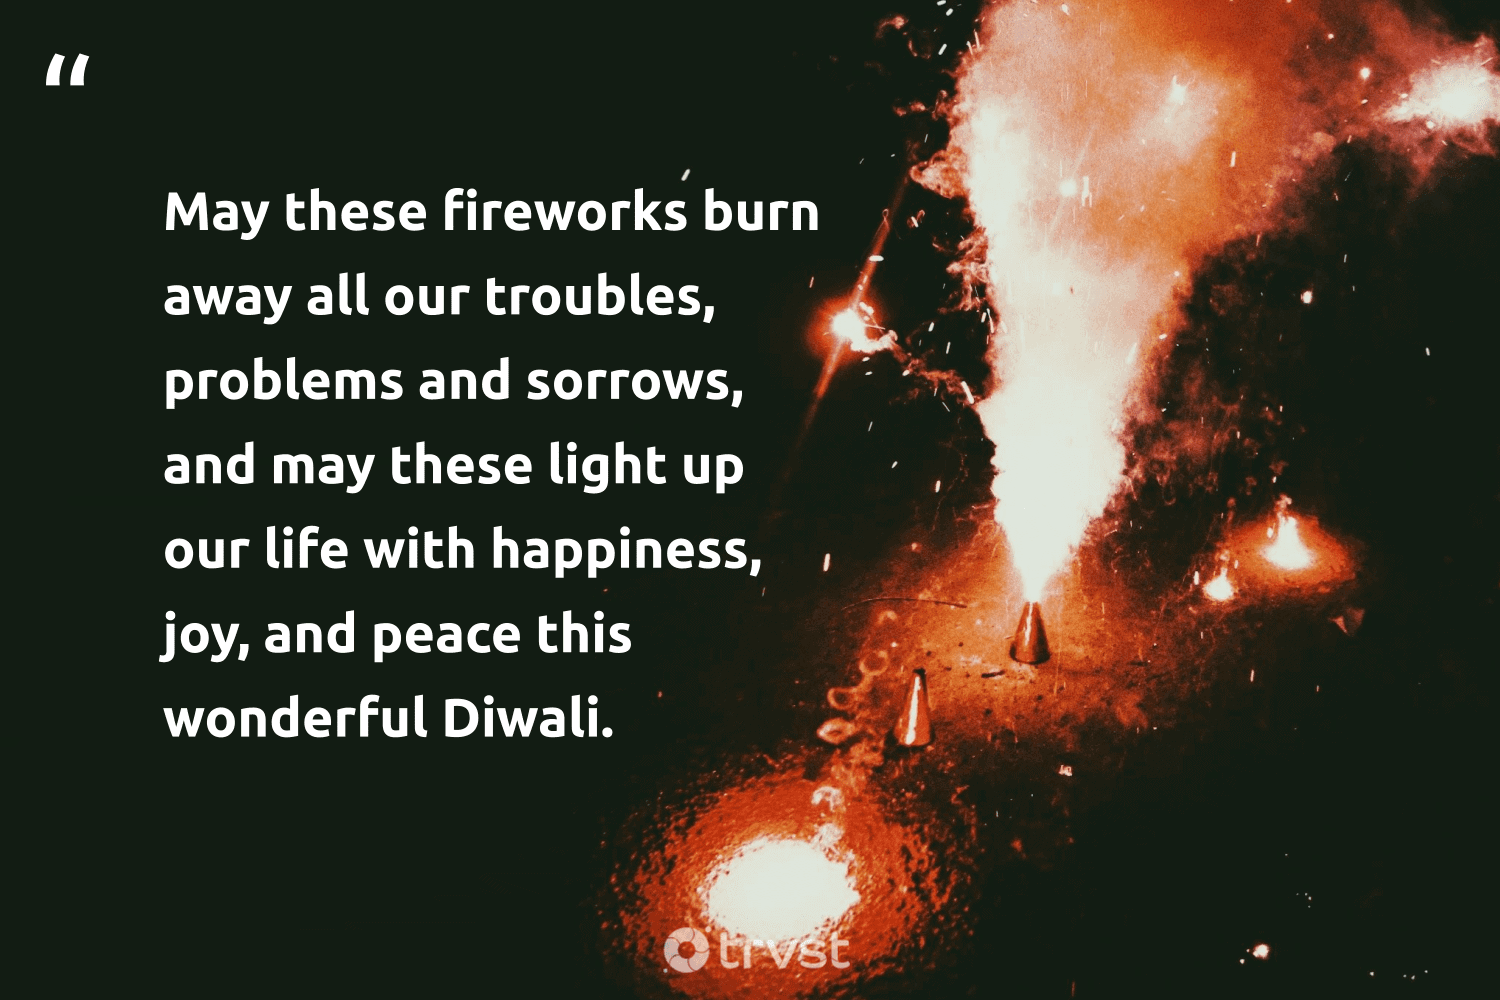 diwali quotes may these fireworks burn 5377